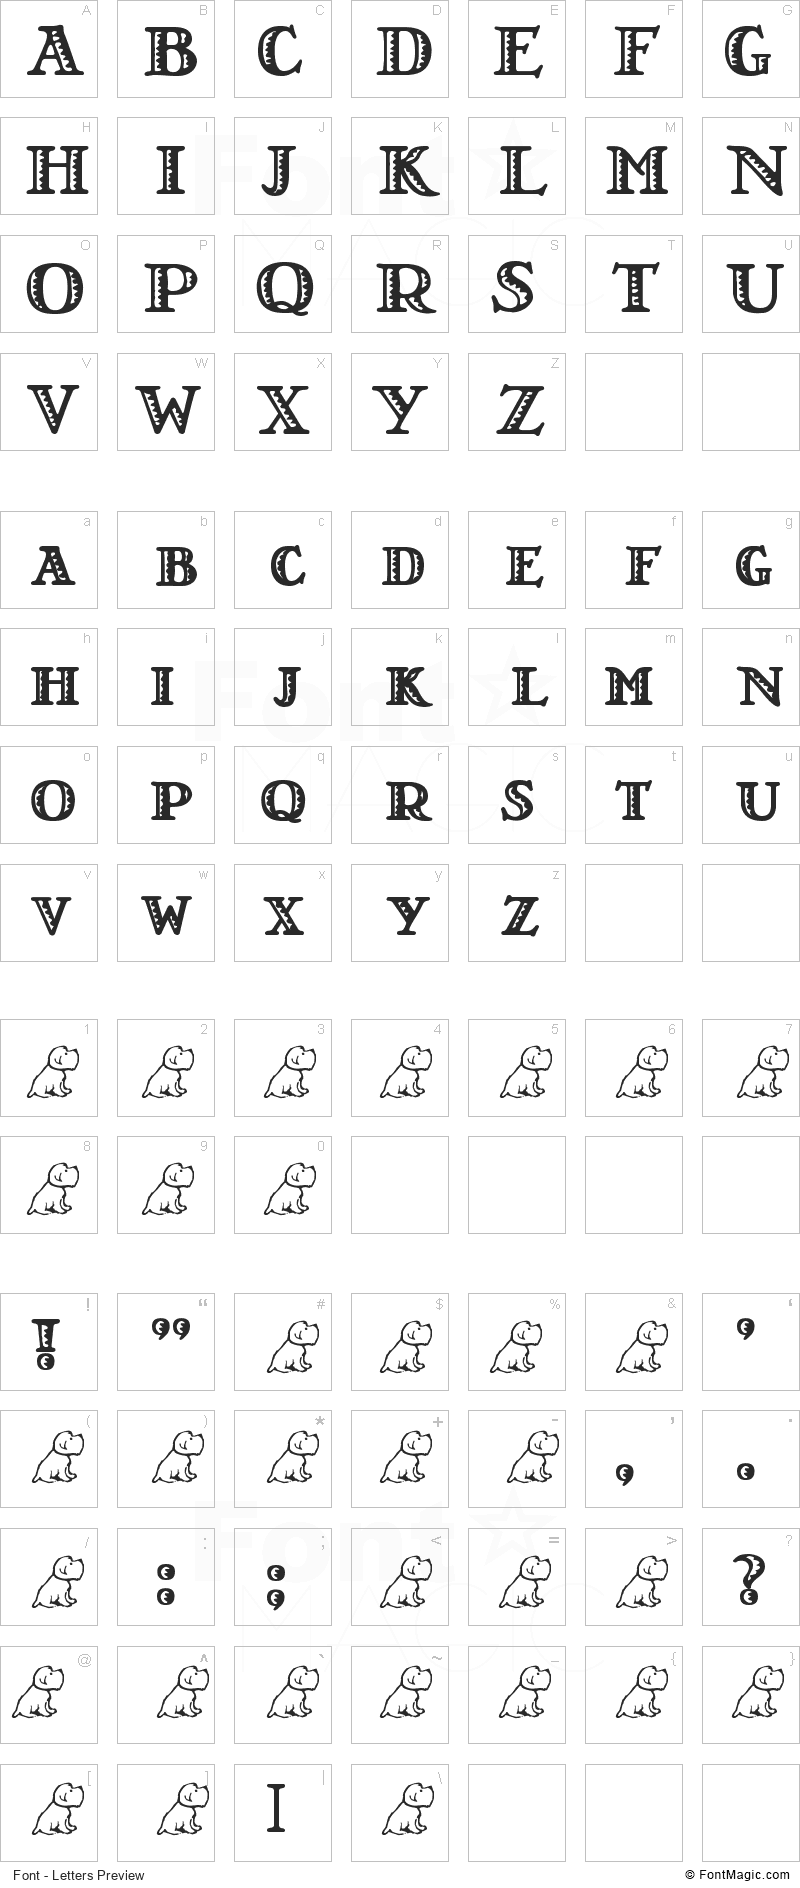 LT Nutshell Library Font - All Latters Preview Chart